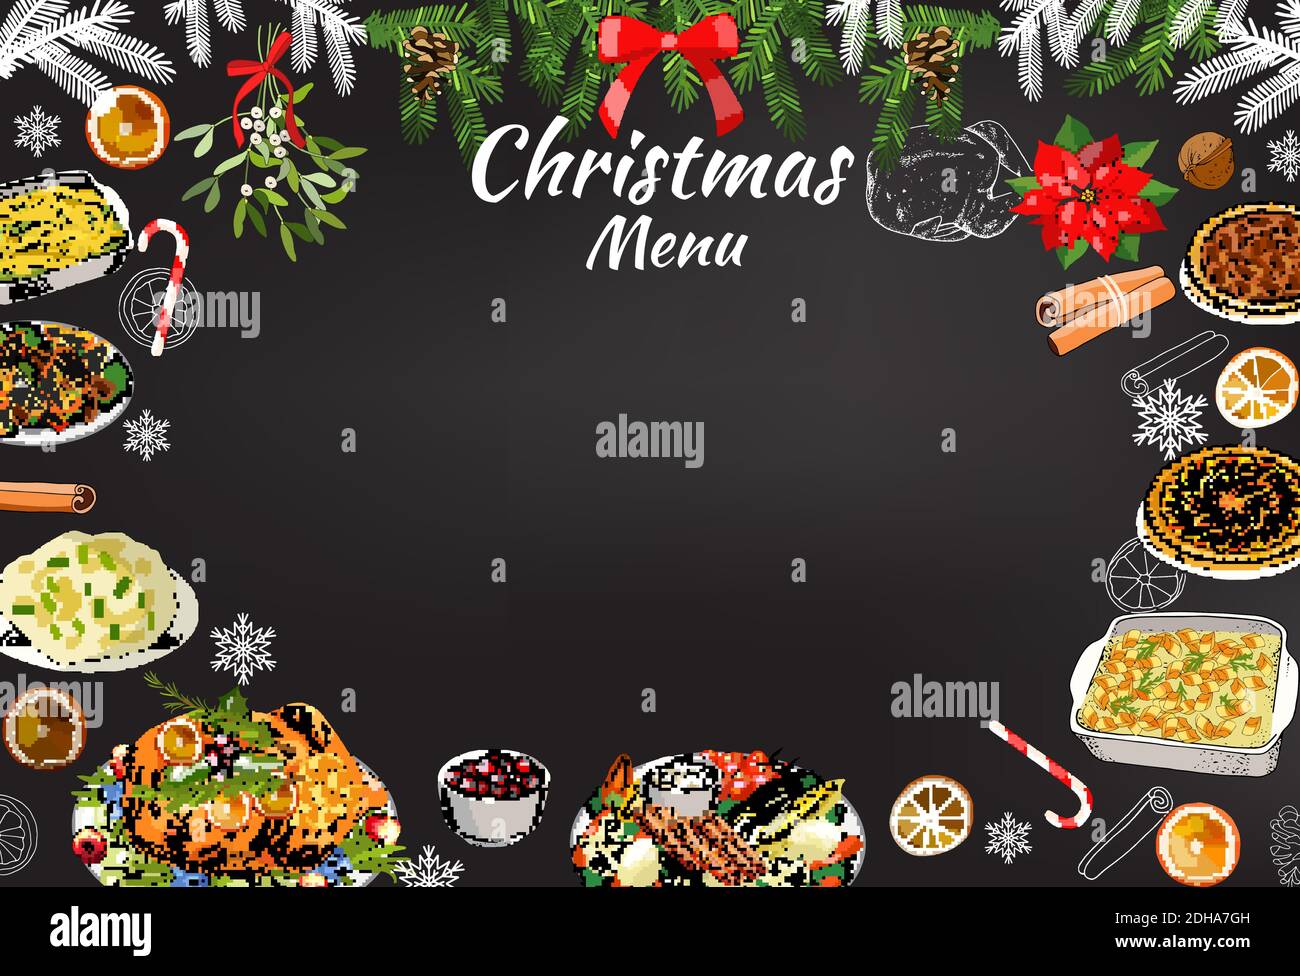 Hand-drawn chalk restaurant festive menu template on chalkboard. Vector holiday background. Traditional Christmas symbols and dishes. Stock Vector